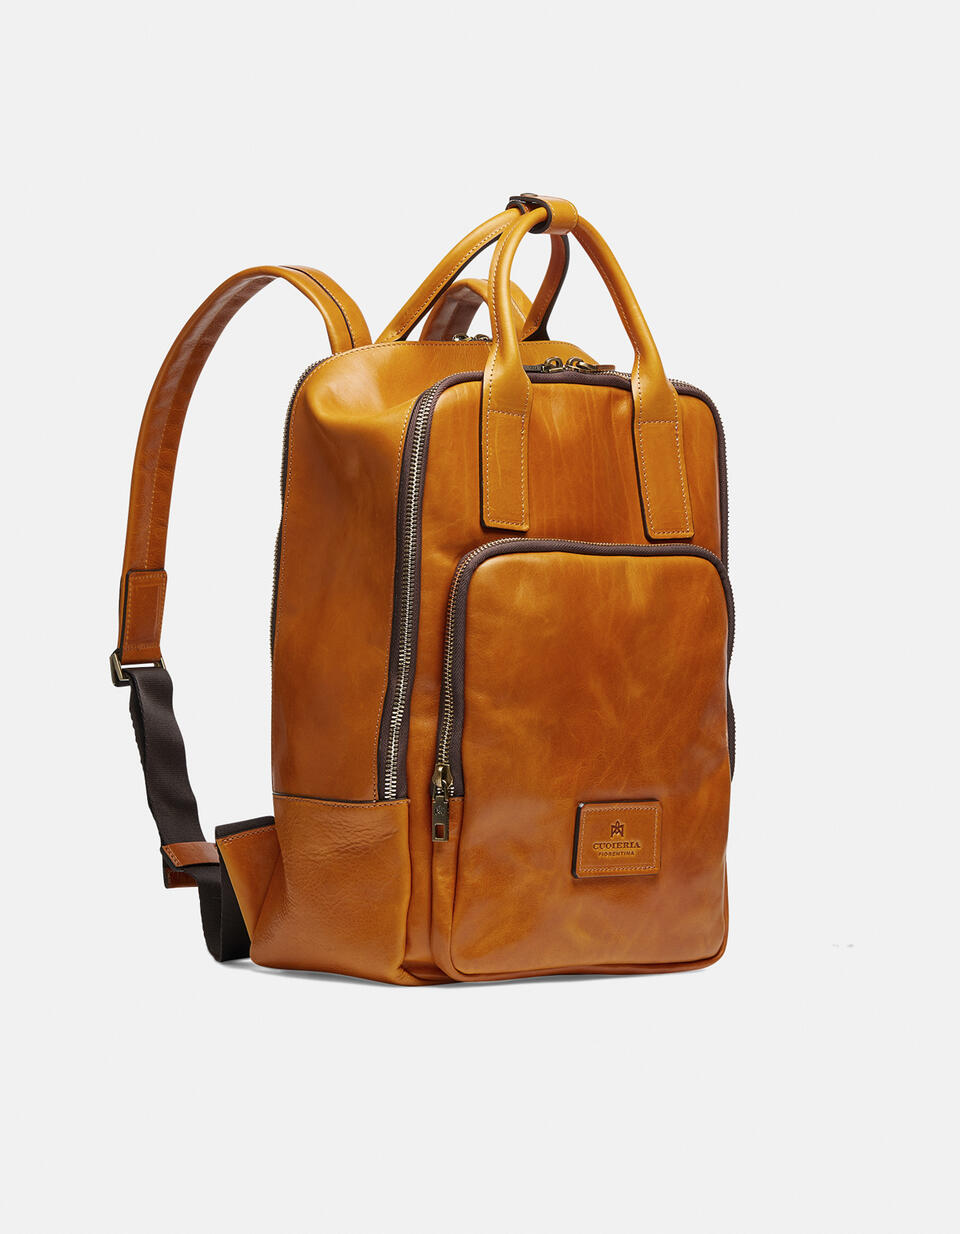 Tokio large backpack in soft leather - Backpacks - MEN'S BAGS | bags GIALLO - Backpacks - MEN'S BAGS | bagsCuoieria Fiorentina